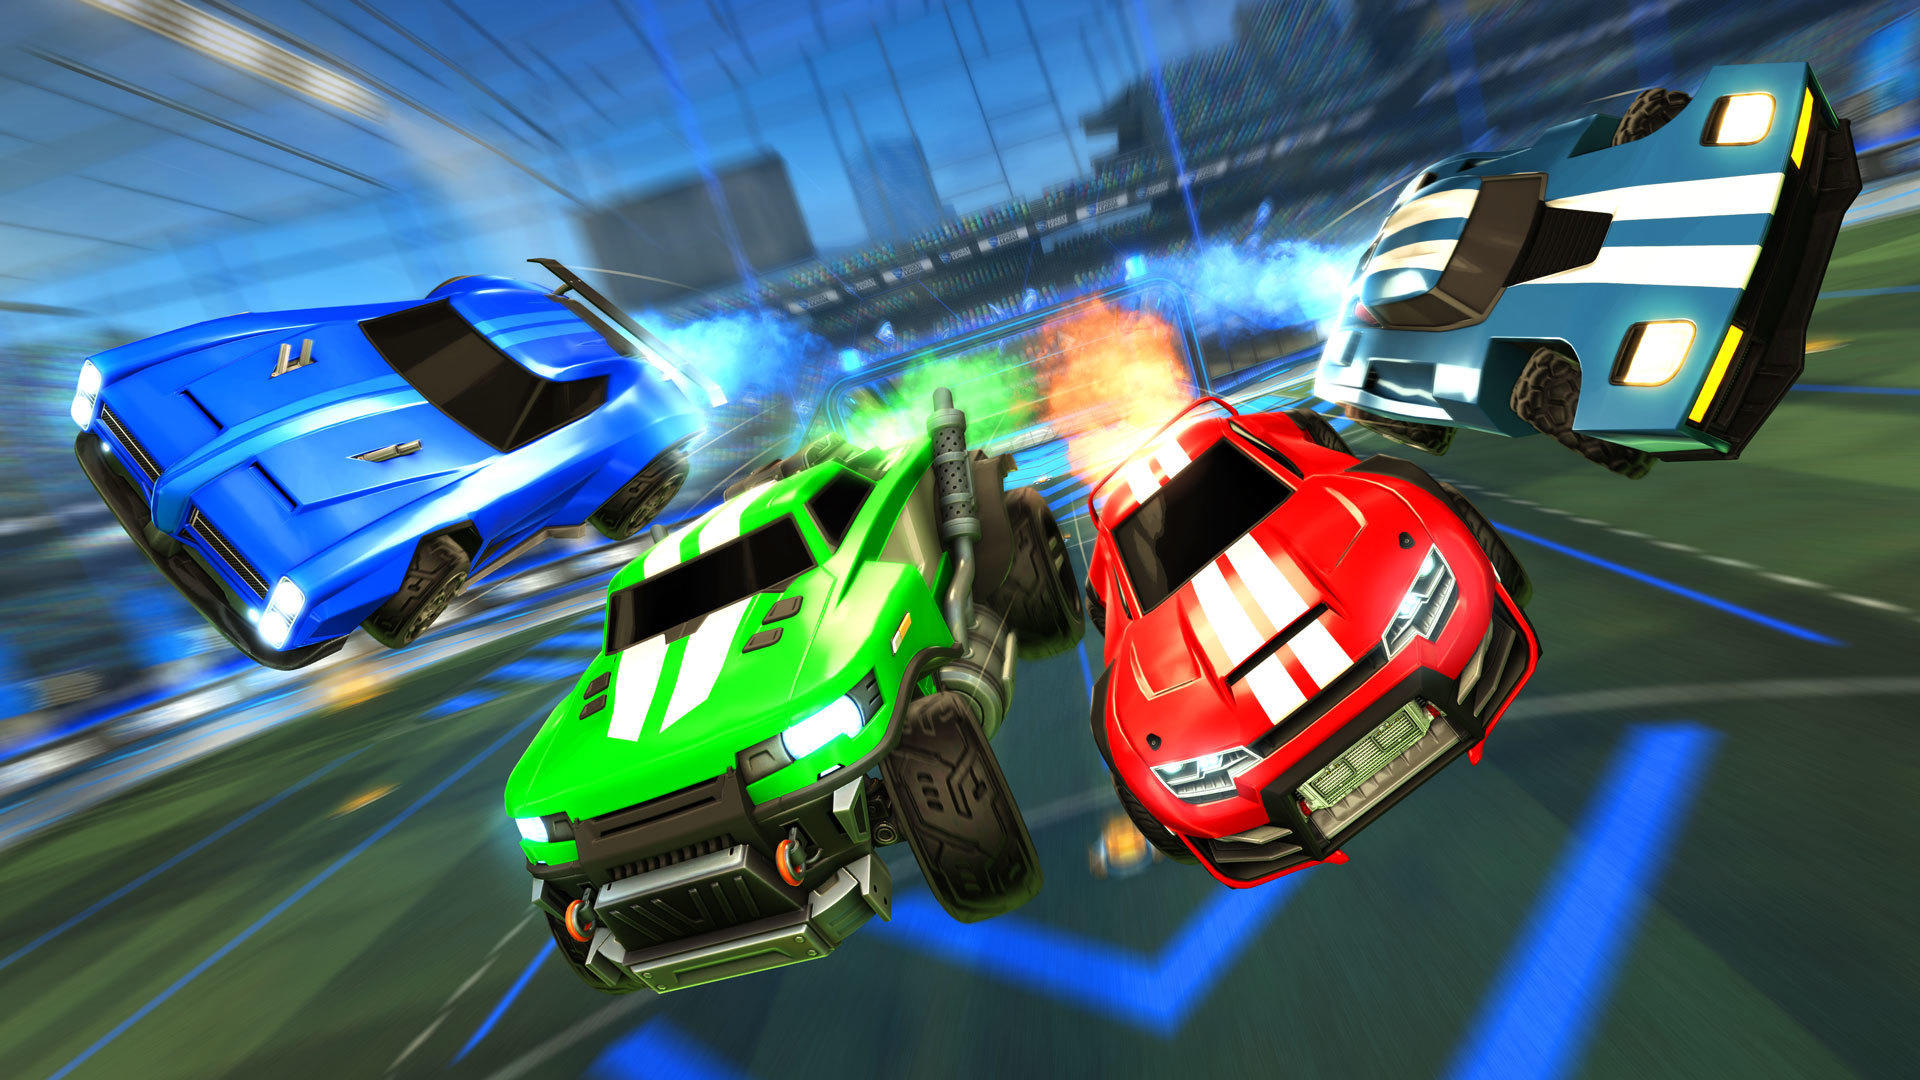 New Content At Stake As Rocket League’s Highly Anticipated Rocket Pass Is Back